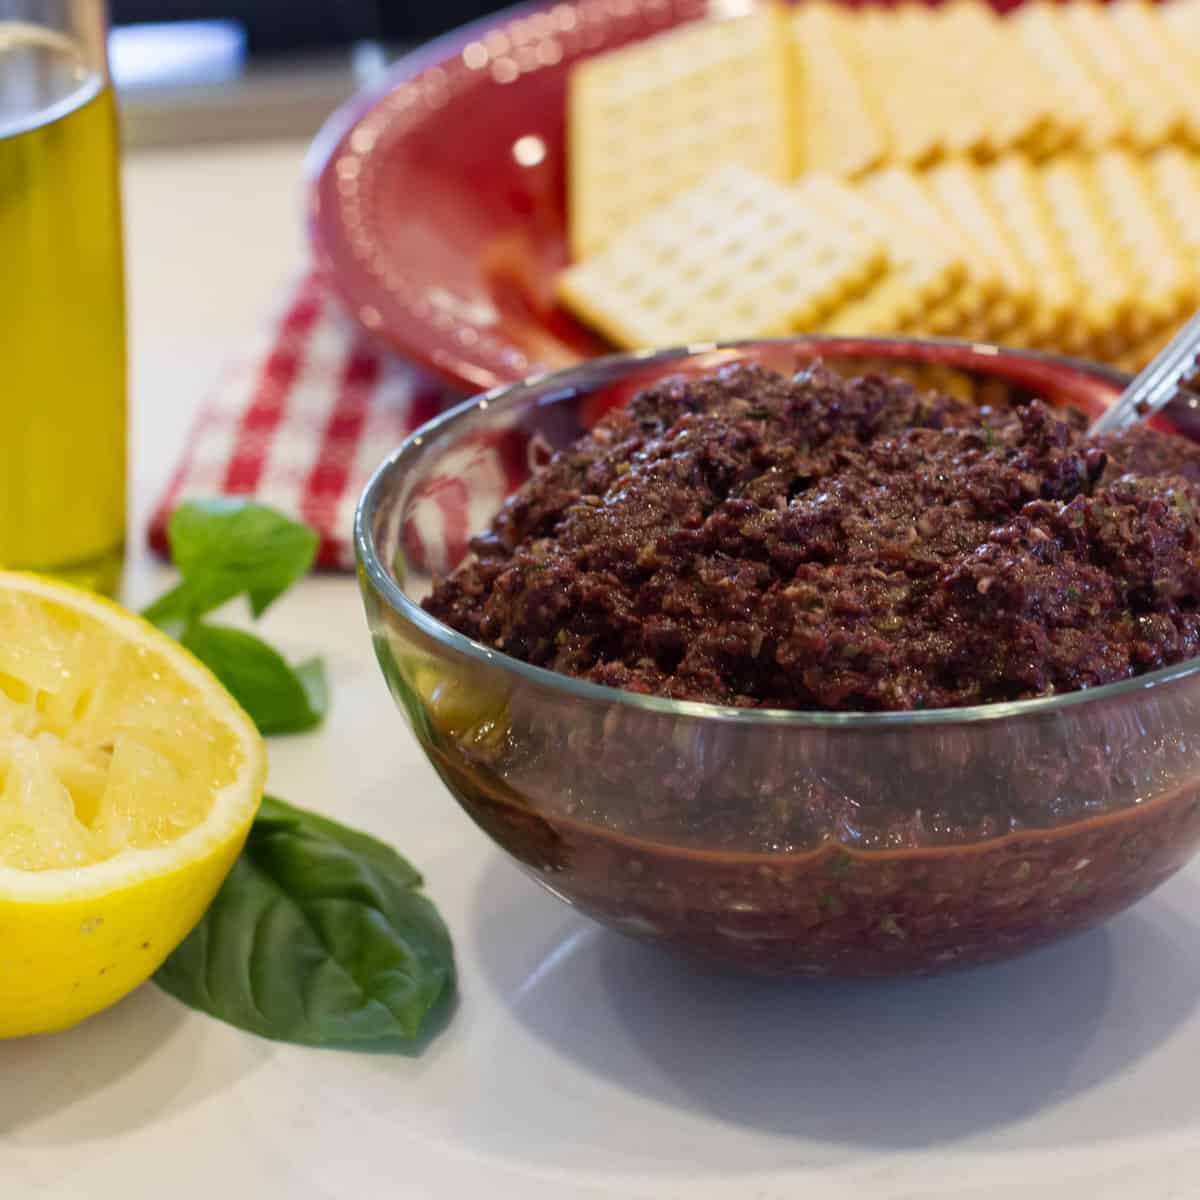 A bowl of tapenade with a plate of crackers behind.